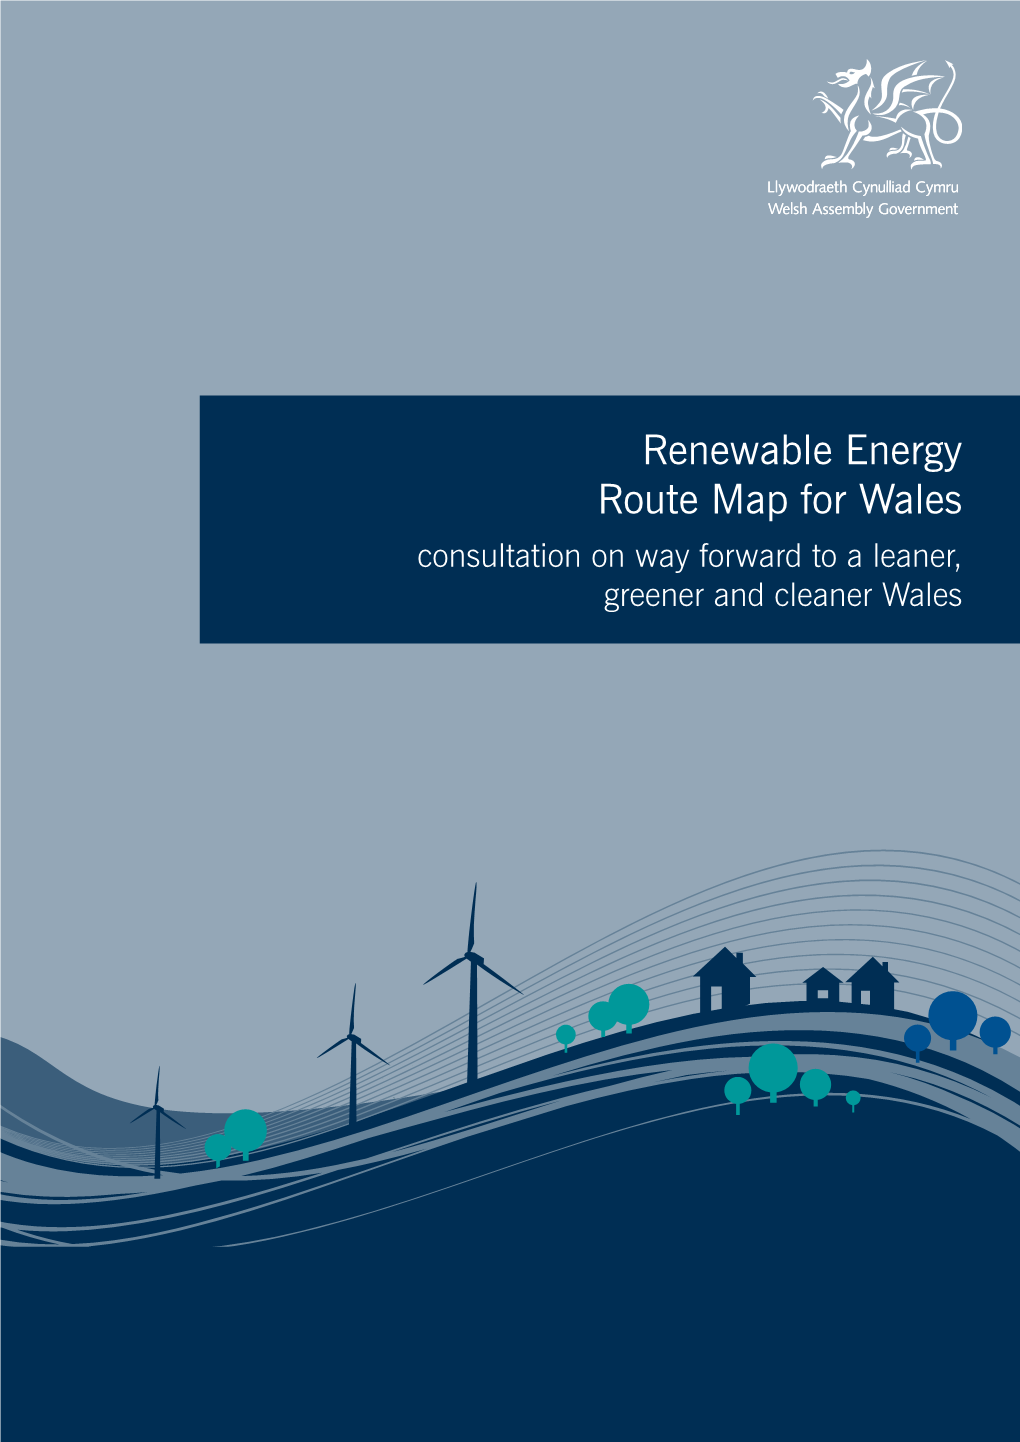 Renewable Energy Route Map for Wales Consultation on Way Forward to a Leaner, Greener and Cleaner Wales Renewable Energy Route Map for Wales 3